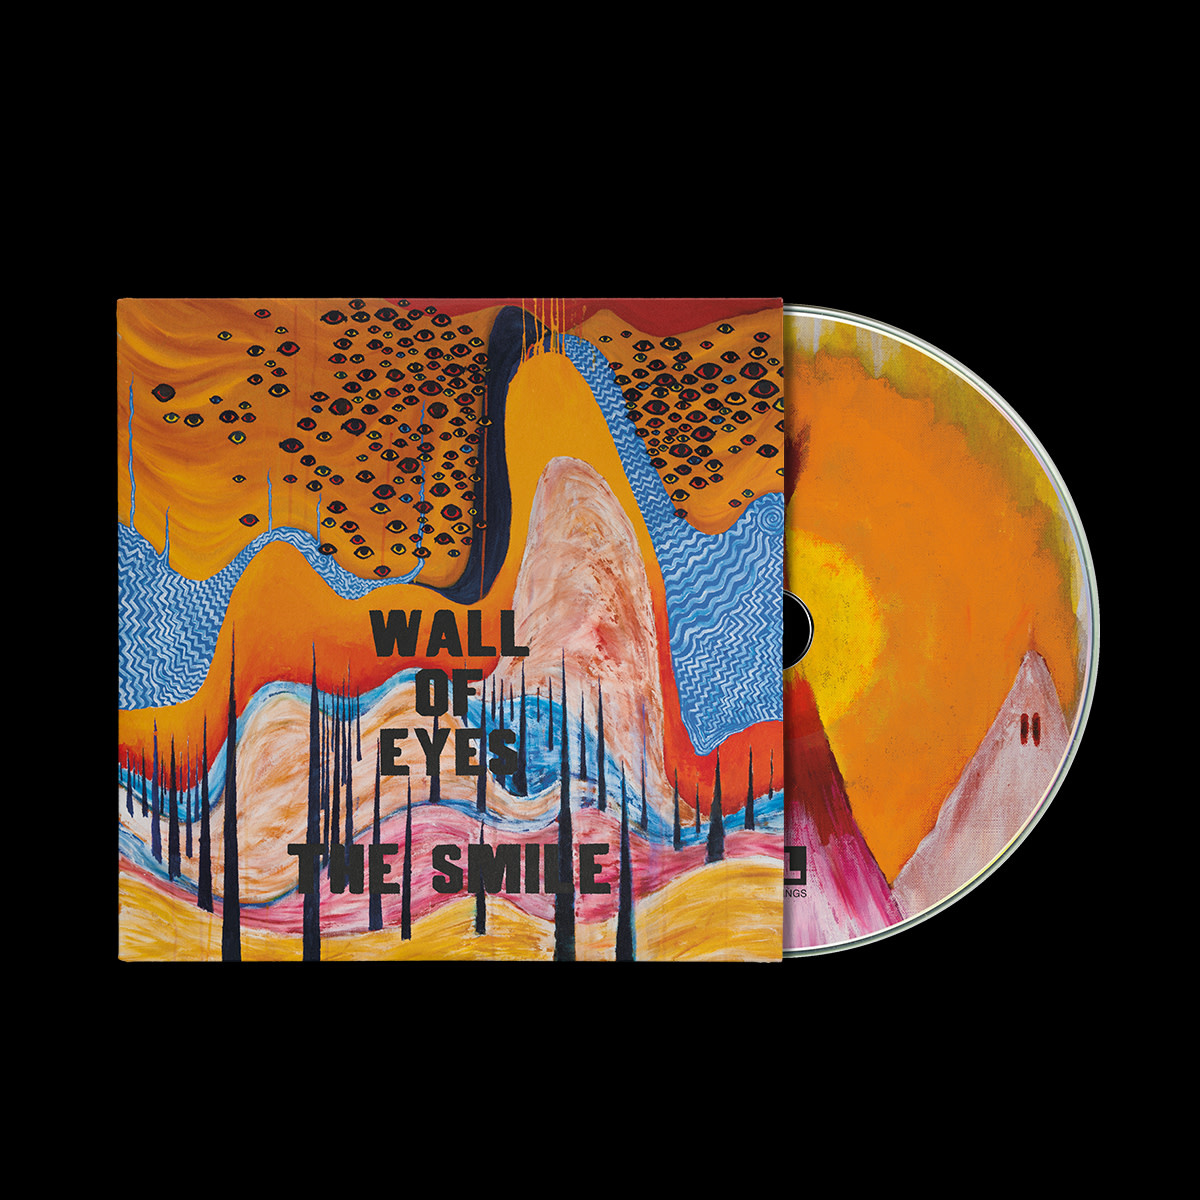 CD) The Smile - Wall of Eyes - Dead Dog Records